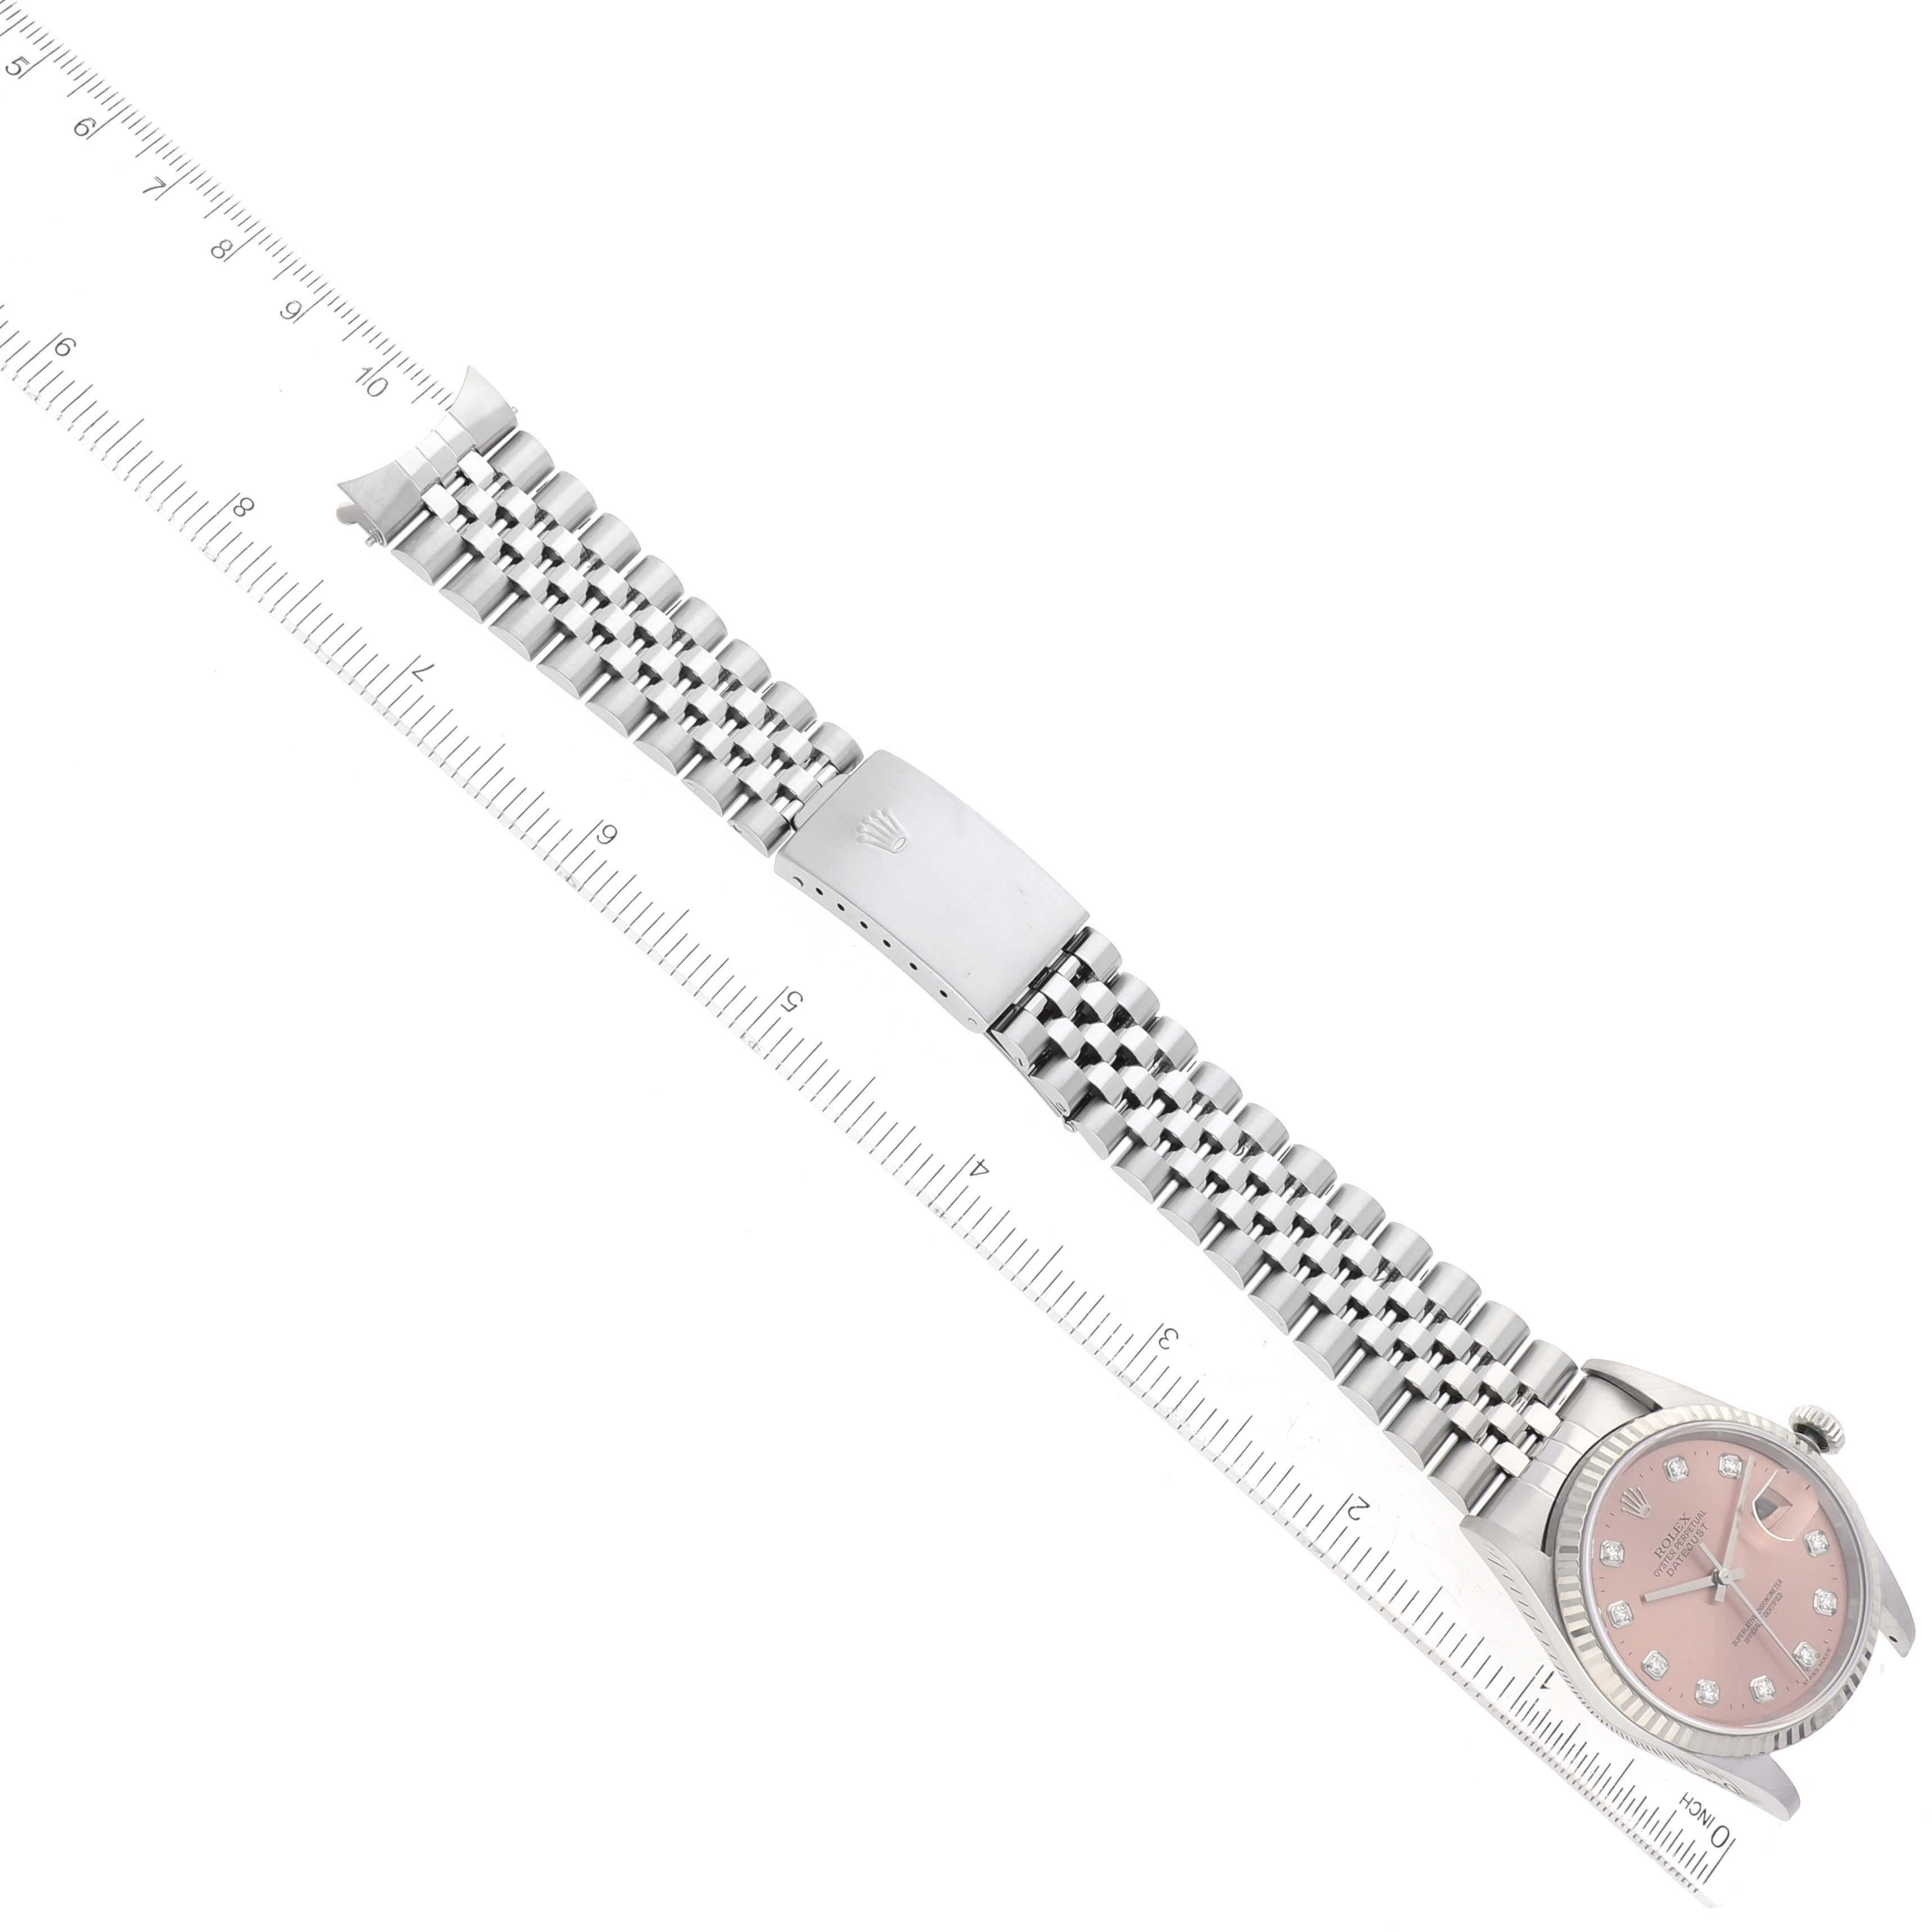 Rolex Datejust Steel White Gold Salmon Diamond Dial Mens Watch 16234 For Sale 6